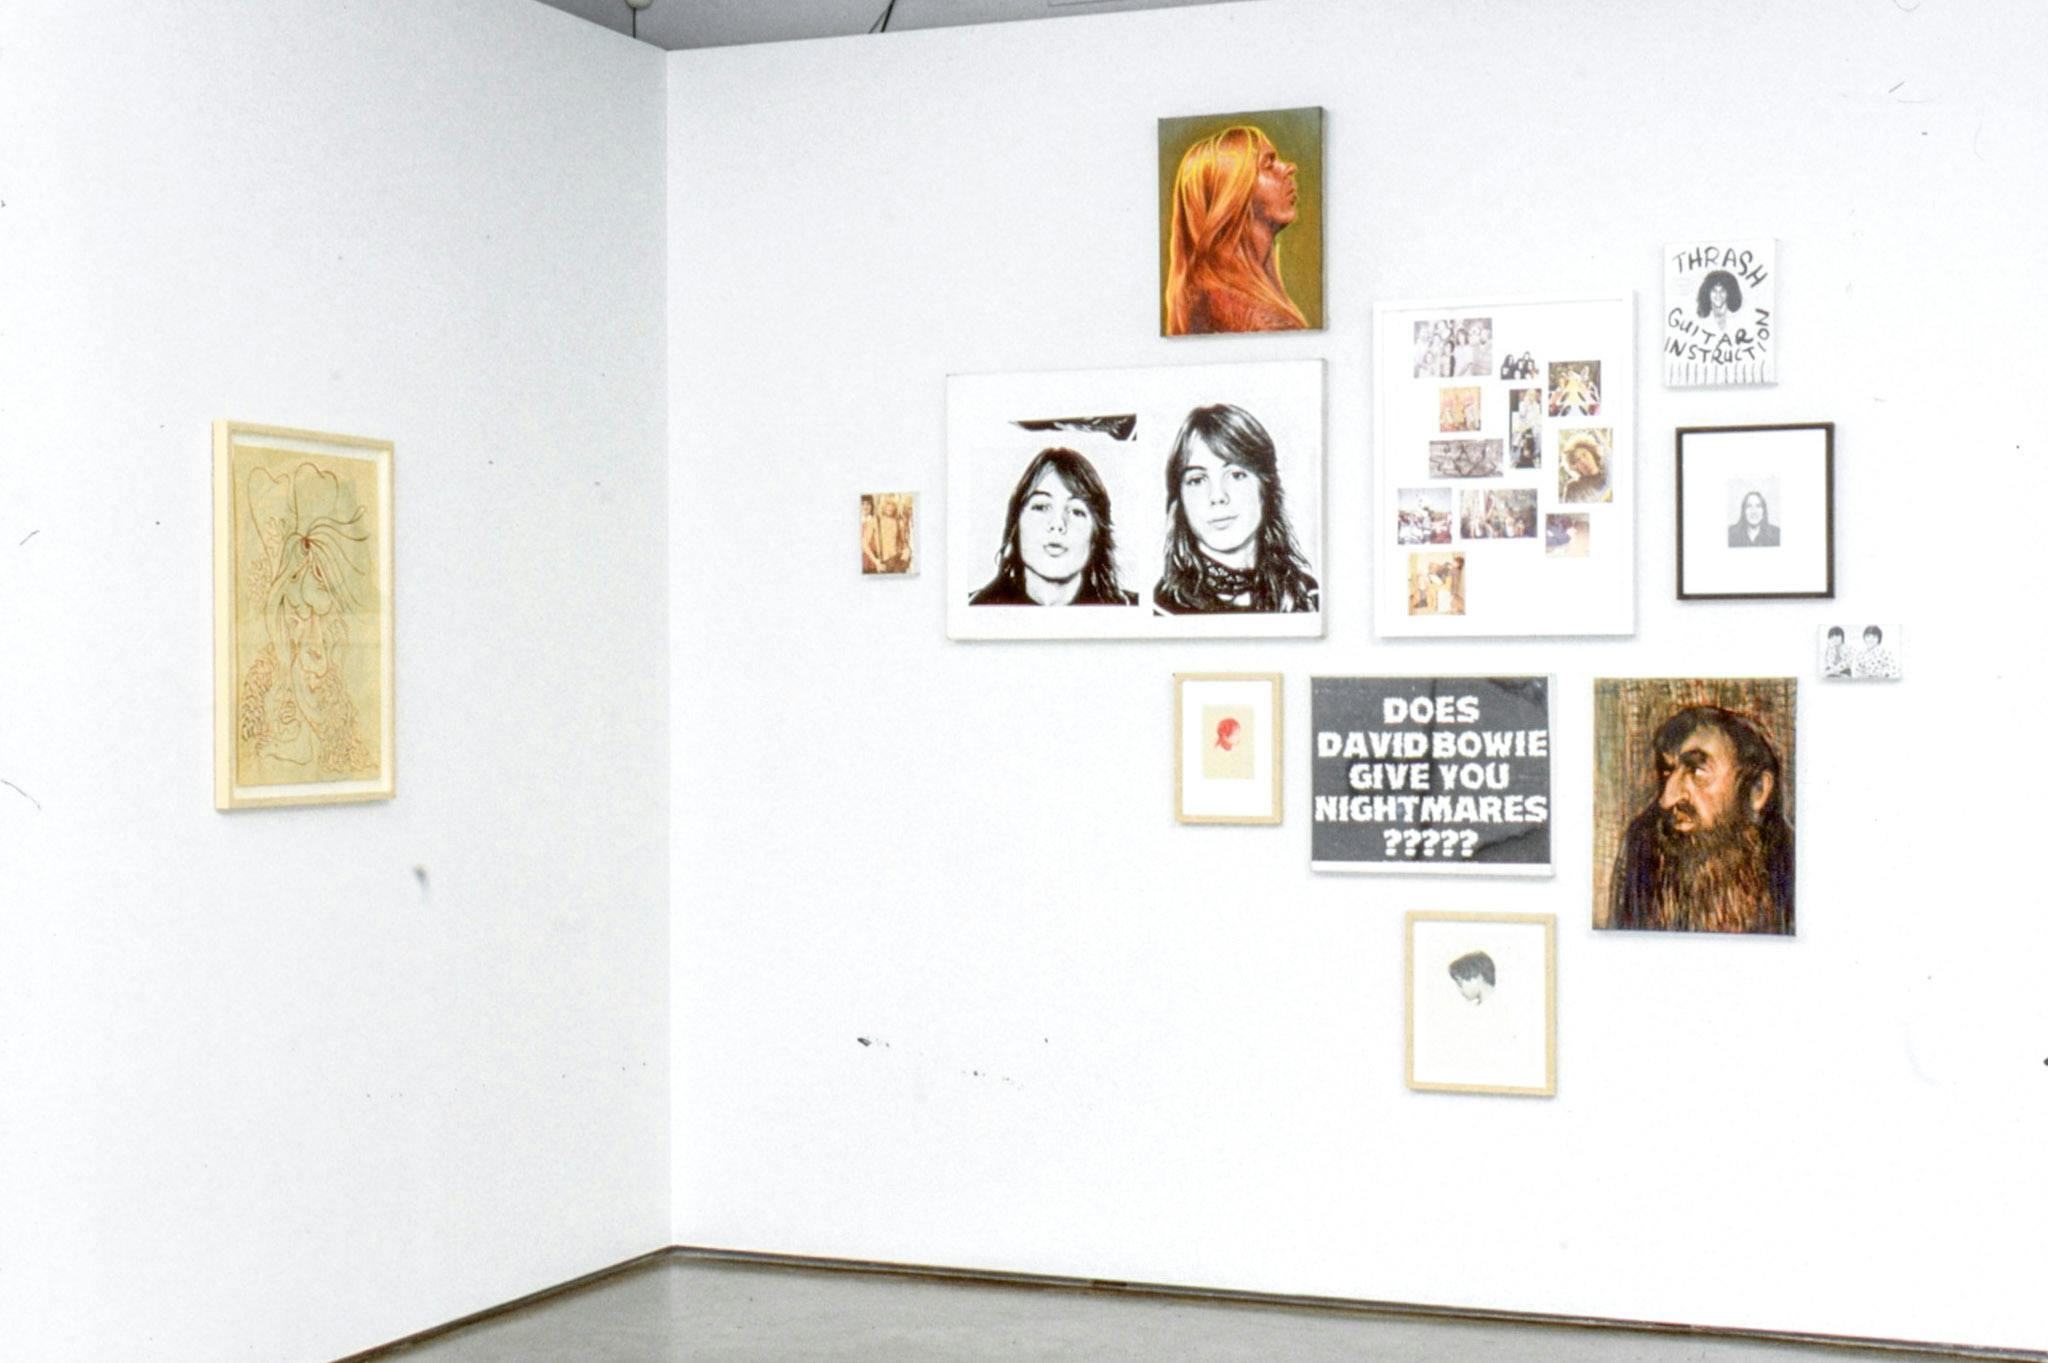 Installation image of works by Steven Shearer. Paintings, drawings, collage works, and photographs are mounted on the walls. Many of these works show figures of people, including a portrait of a person with a long brown beard.